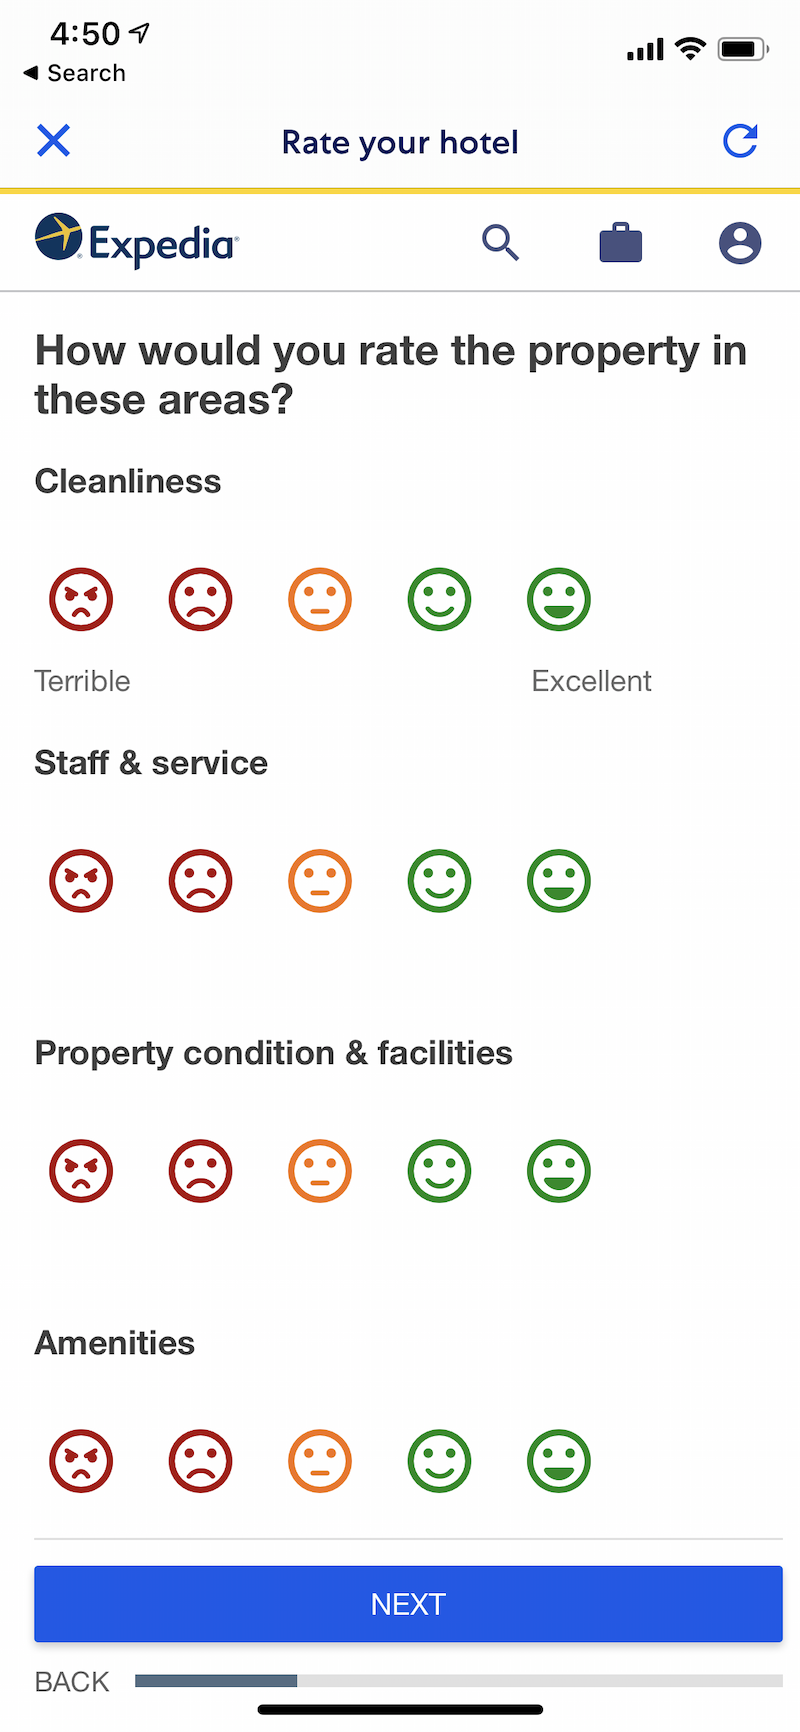 Screenshot of Expedia's hotel rating review system via mobile.